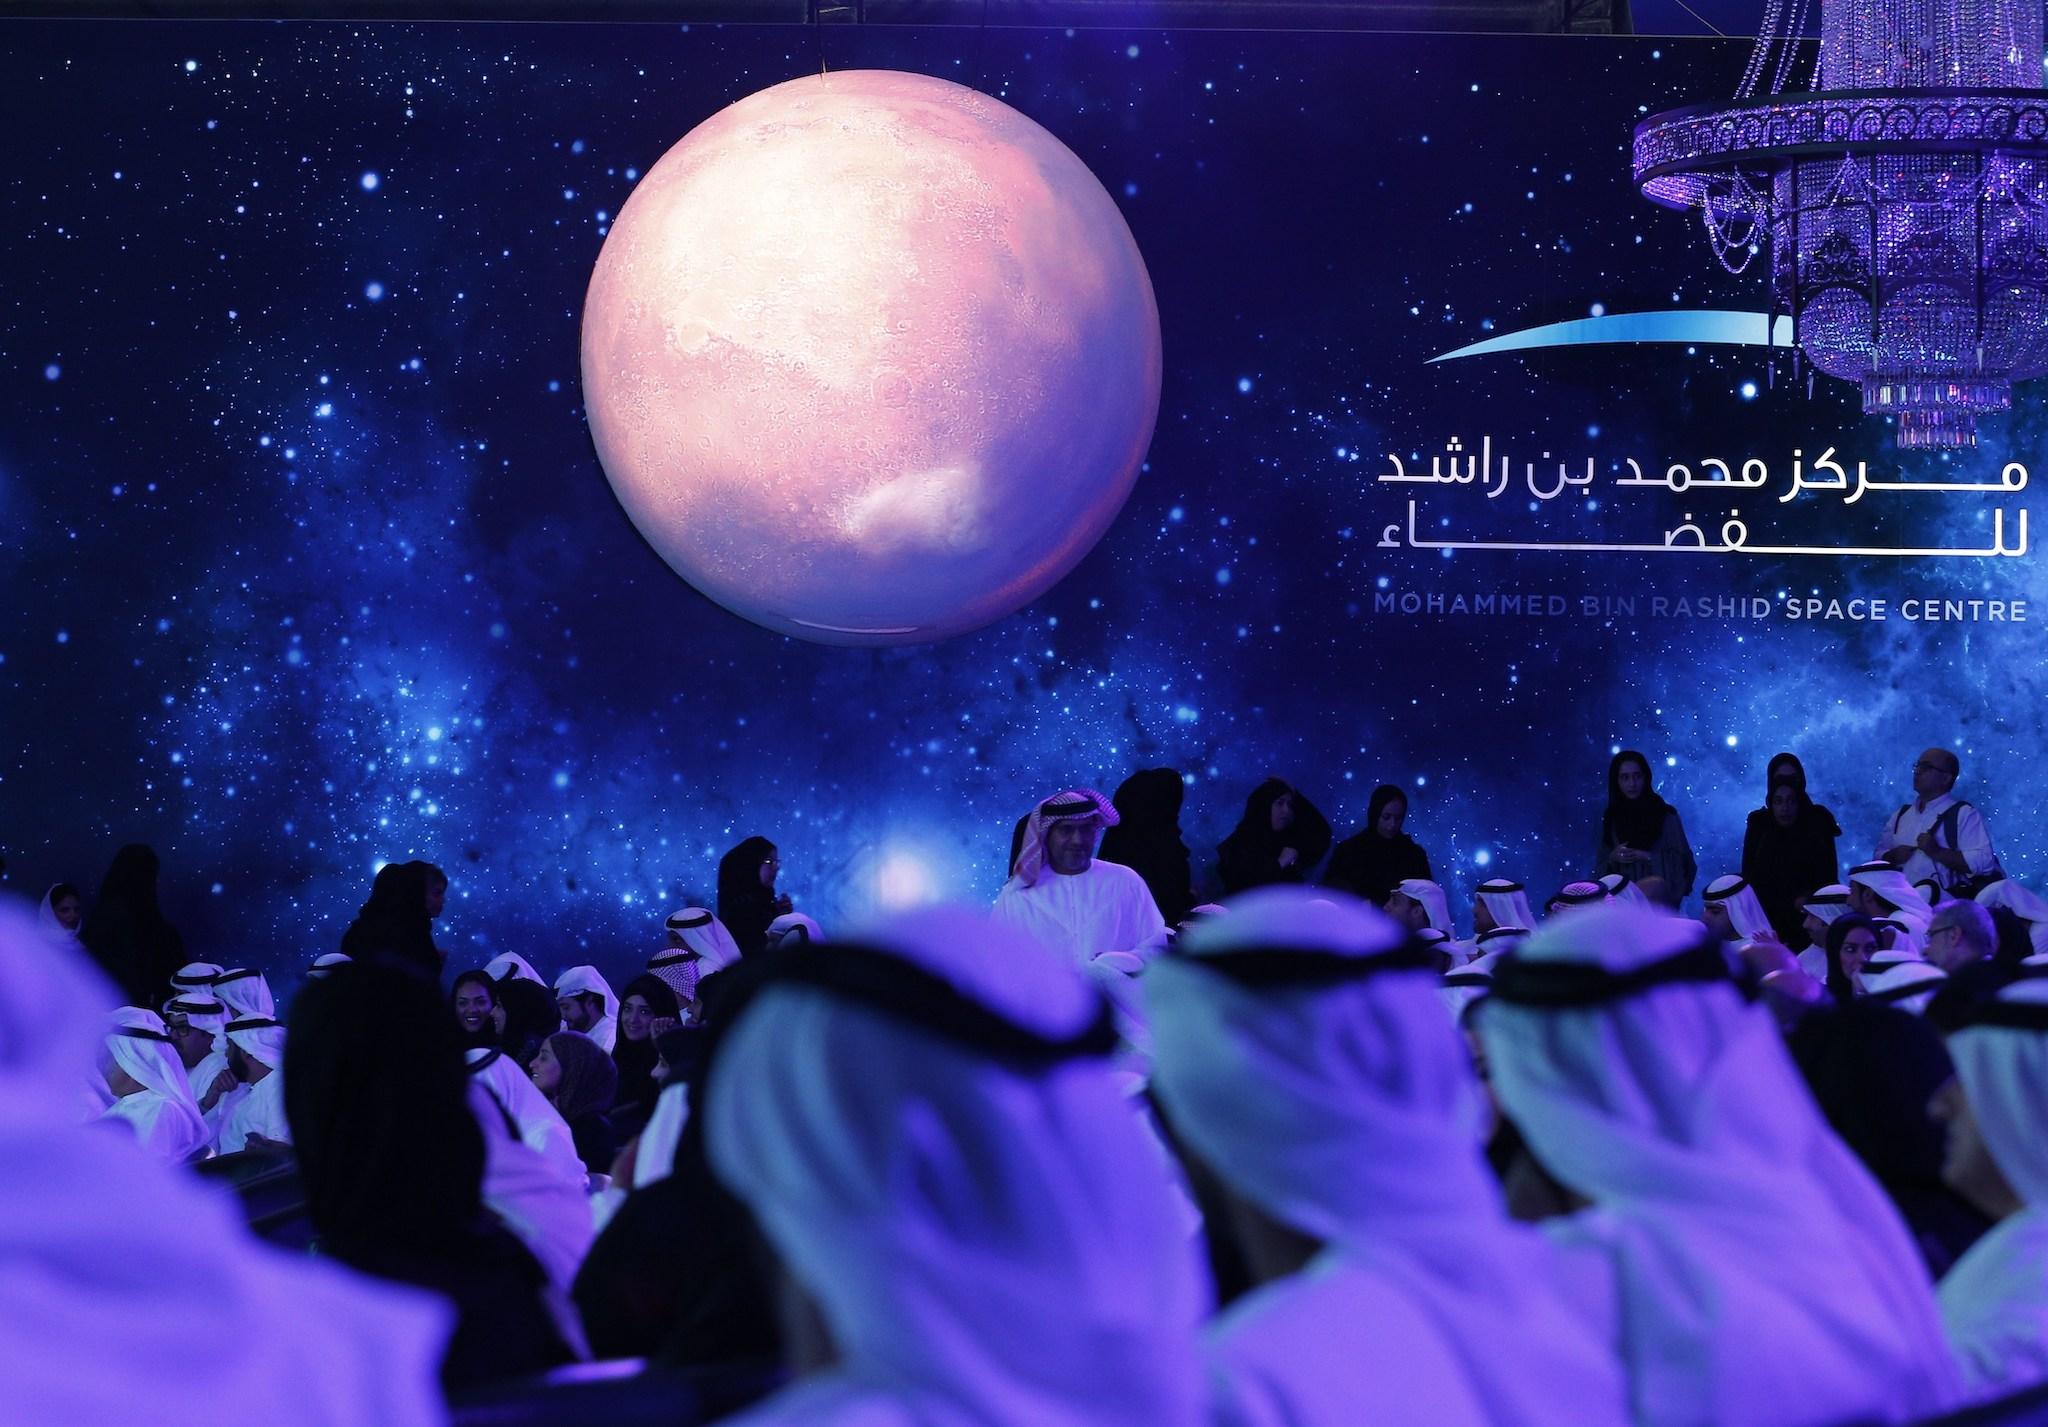 United Arab Emirates (UAE) officials, engineers and scientists take part in a ceremony to unveil UAE's Mars Mission on May 6, 2015 in Dubai